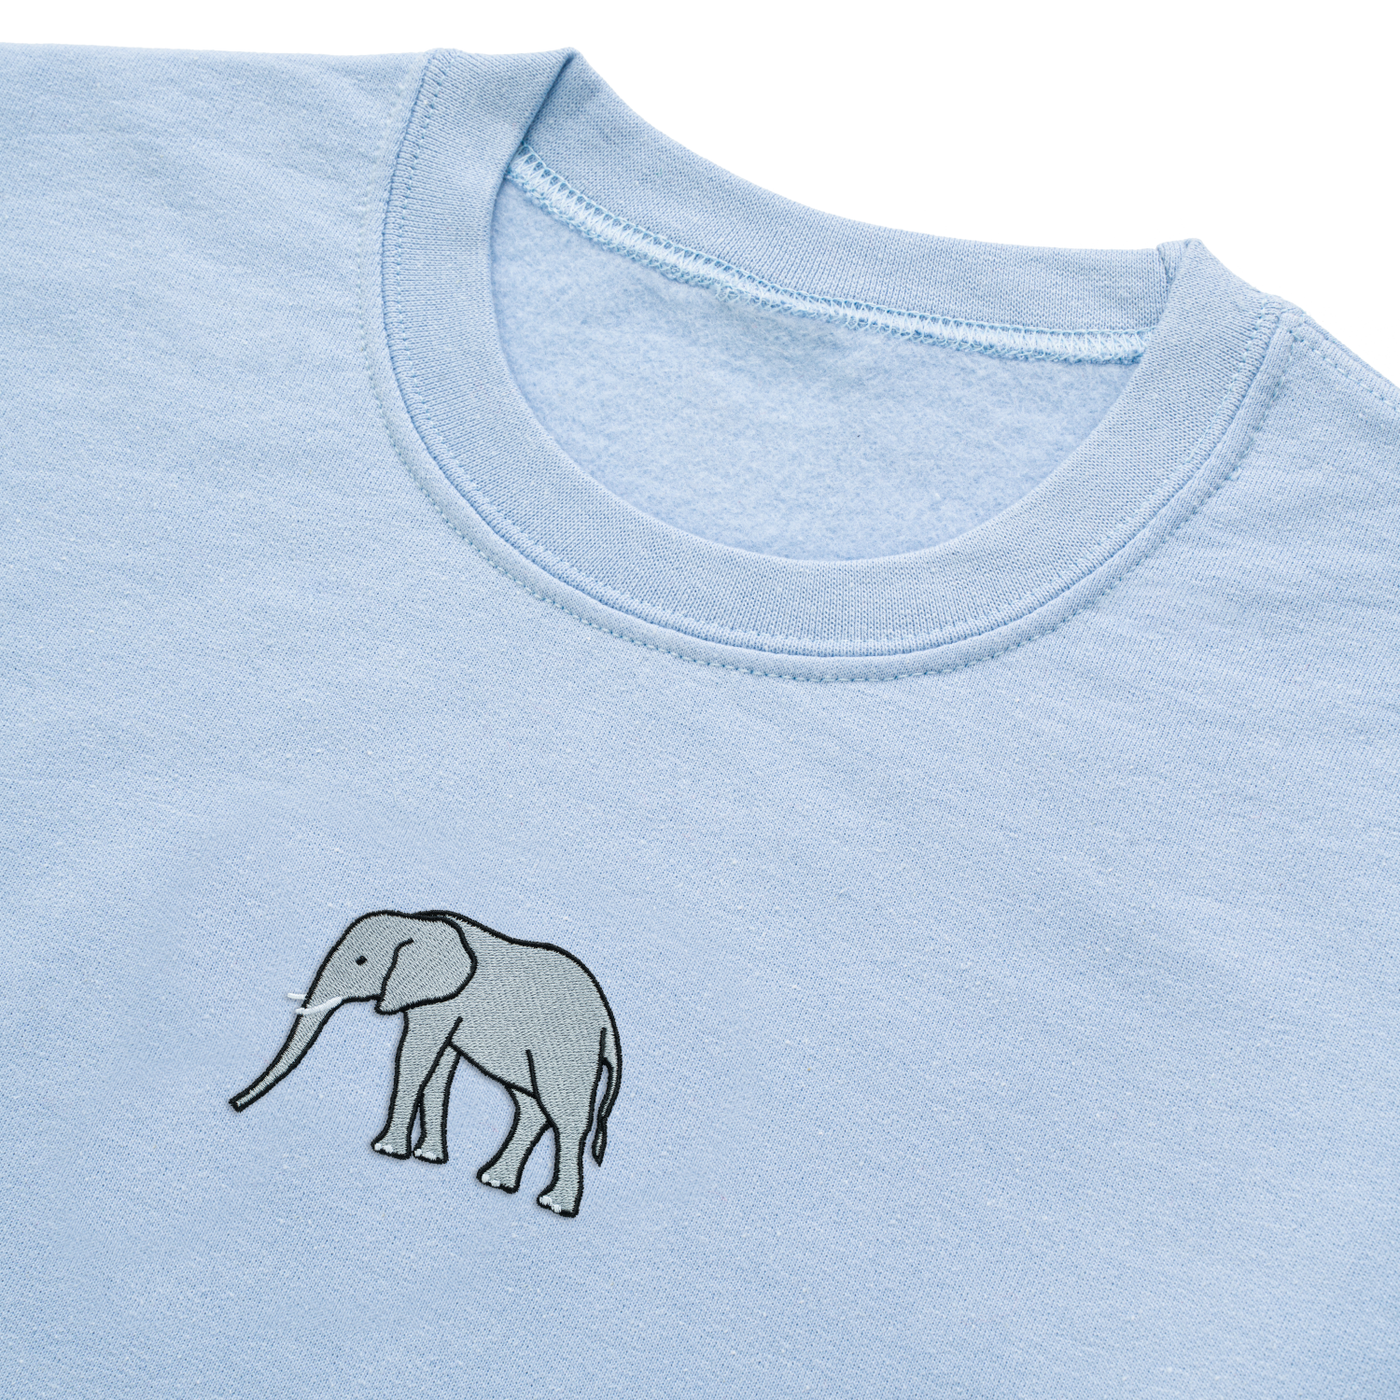 Bobby's Planet Women's Embroidered Elephant Sweatshirt from African Animals Collection in Light Blue Color#color_light-blue